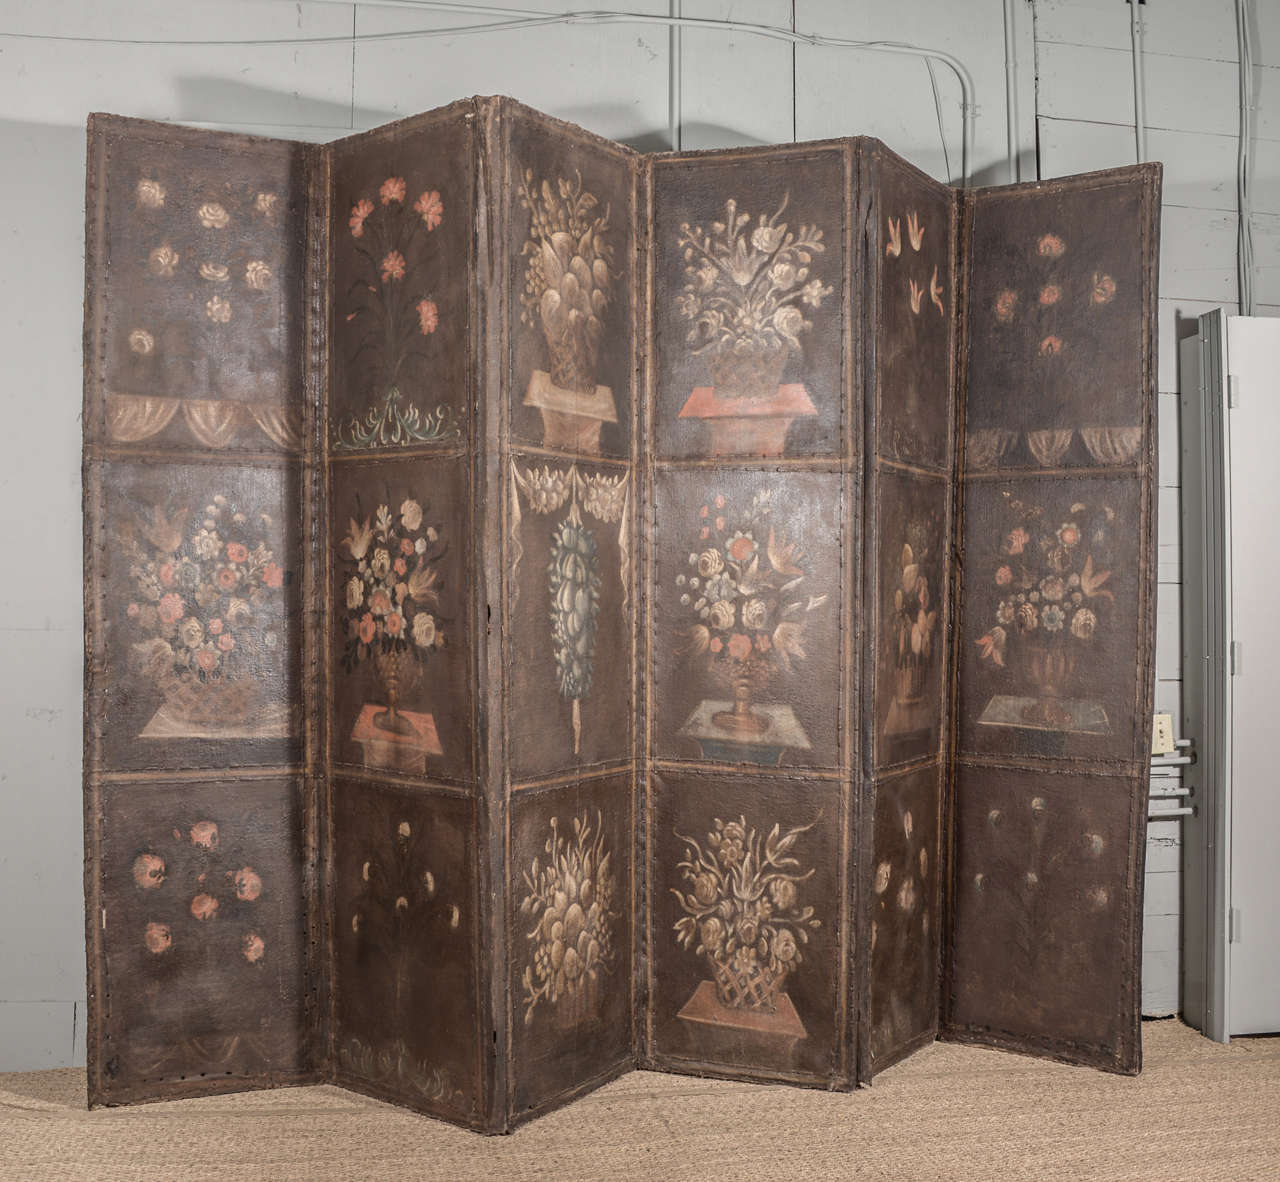 Late 17th century Venetian folding screen, oil on canvas (over restored pegged mortise and tenon wood frame) with fruit compote and floral décor motifs painted on six panels.